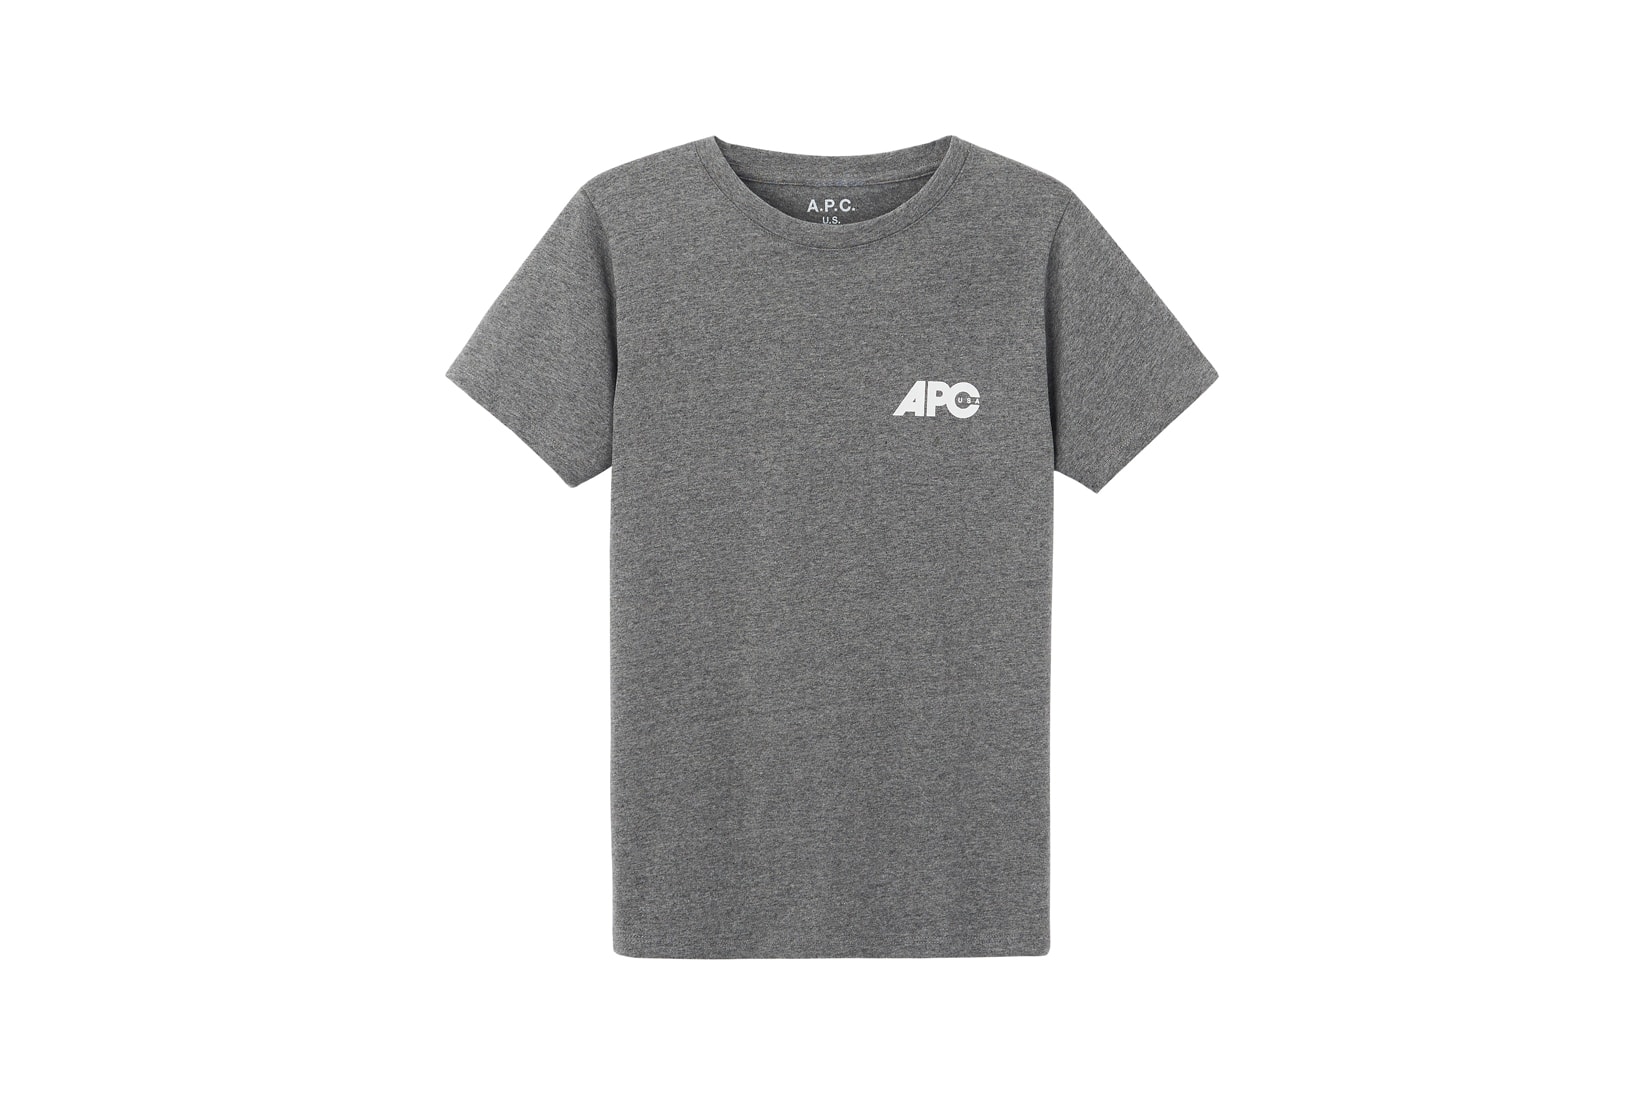 A.P.C. Fall/Winter 2018 Collection Molly T-shirt Grey